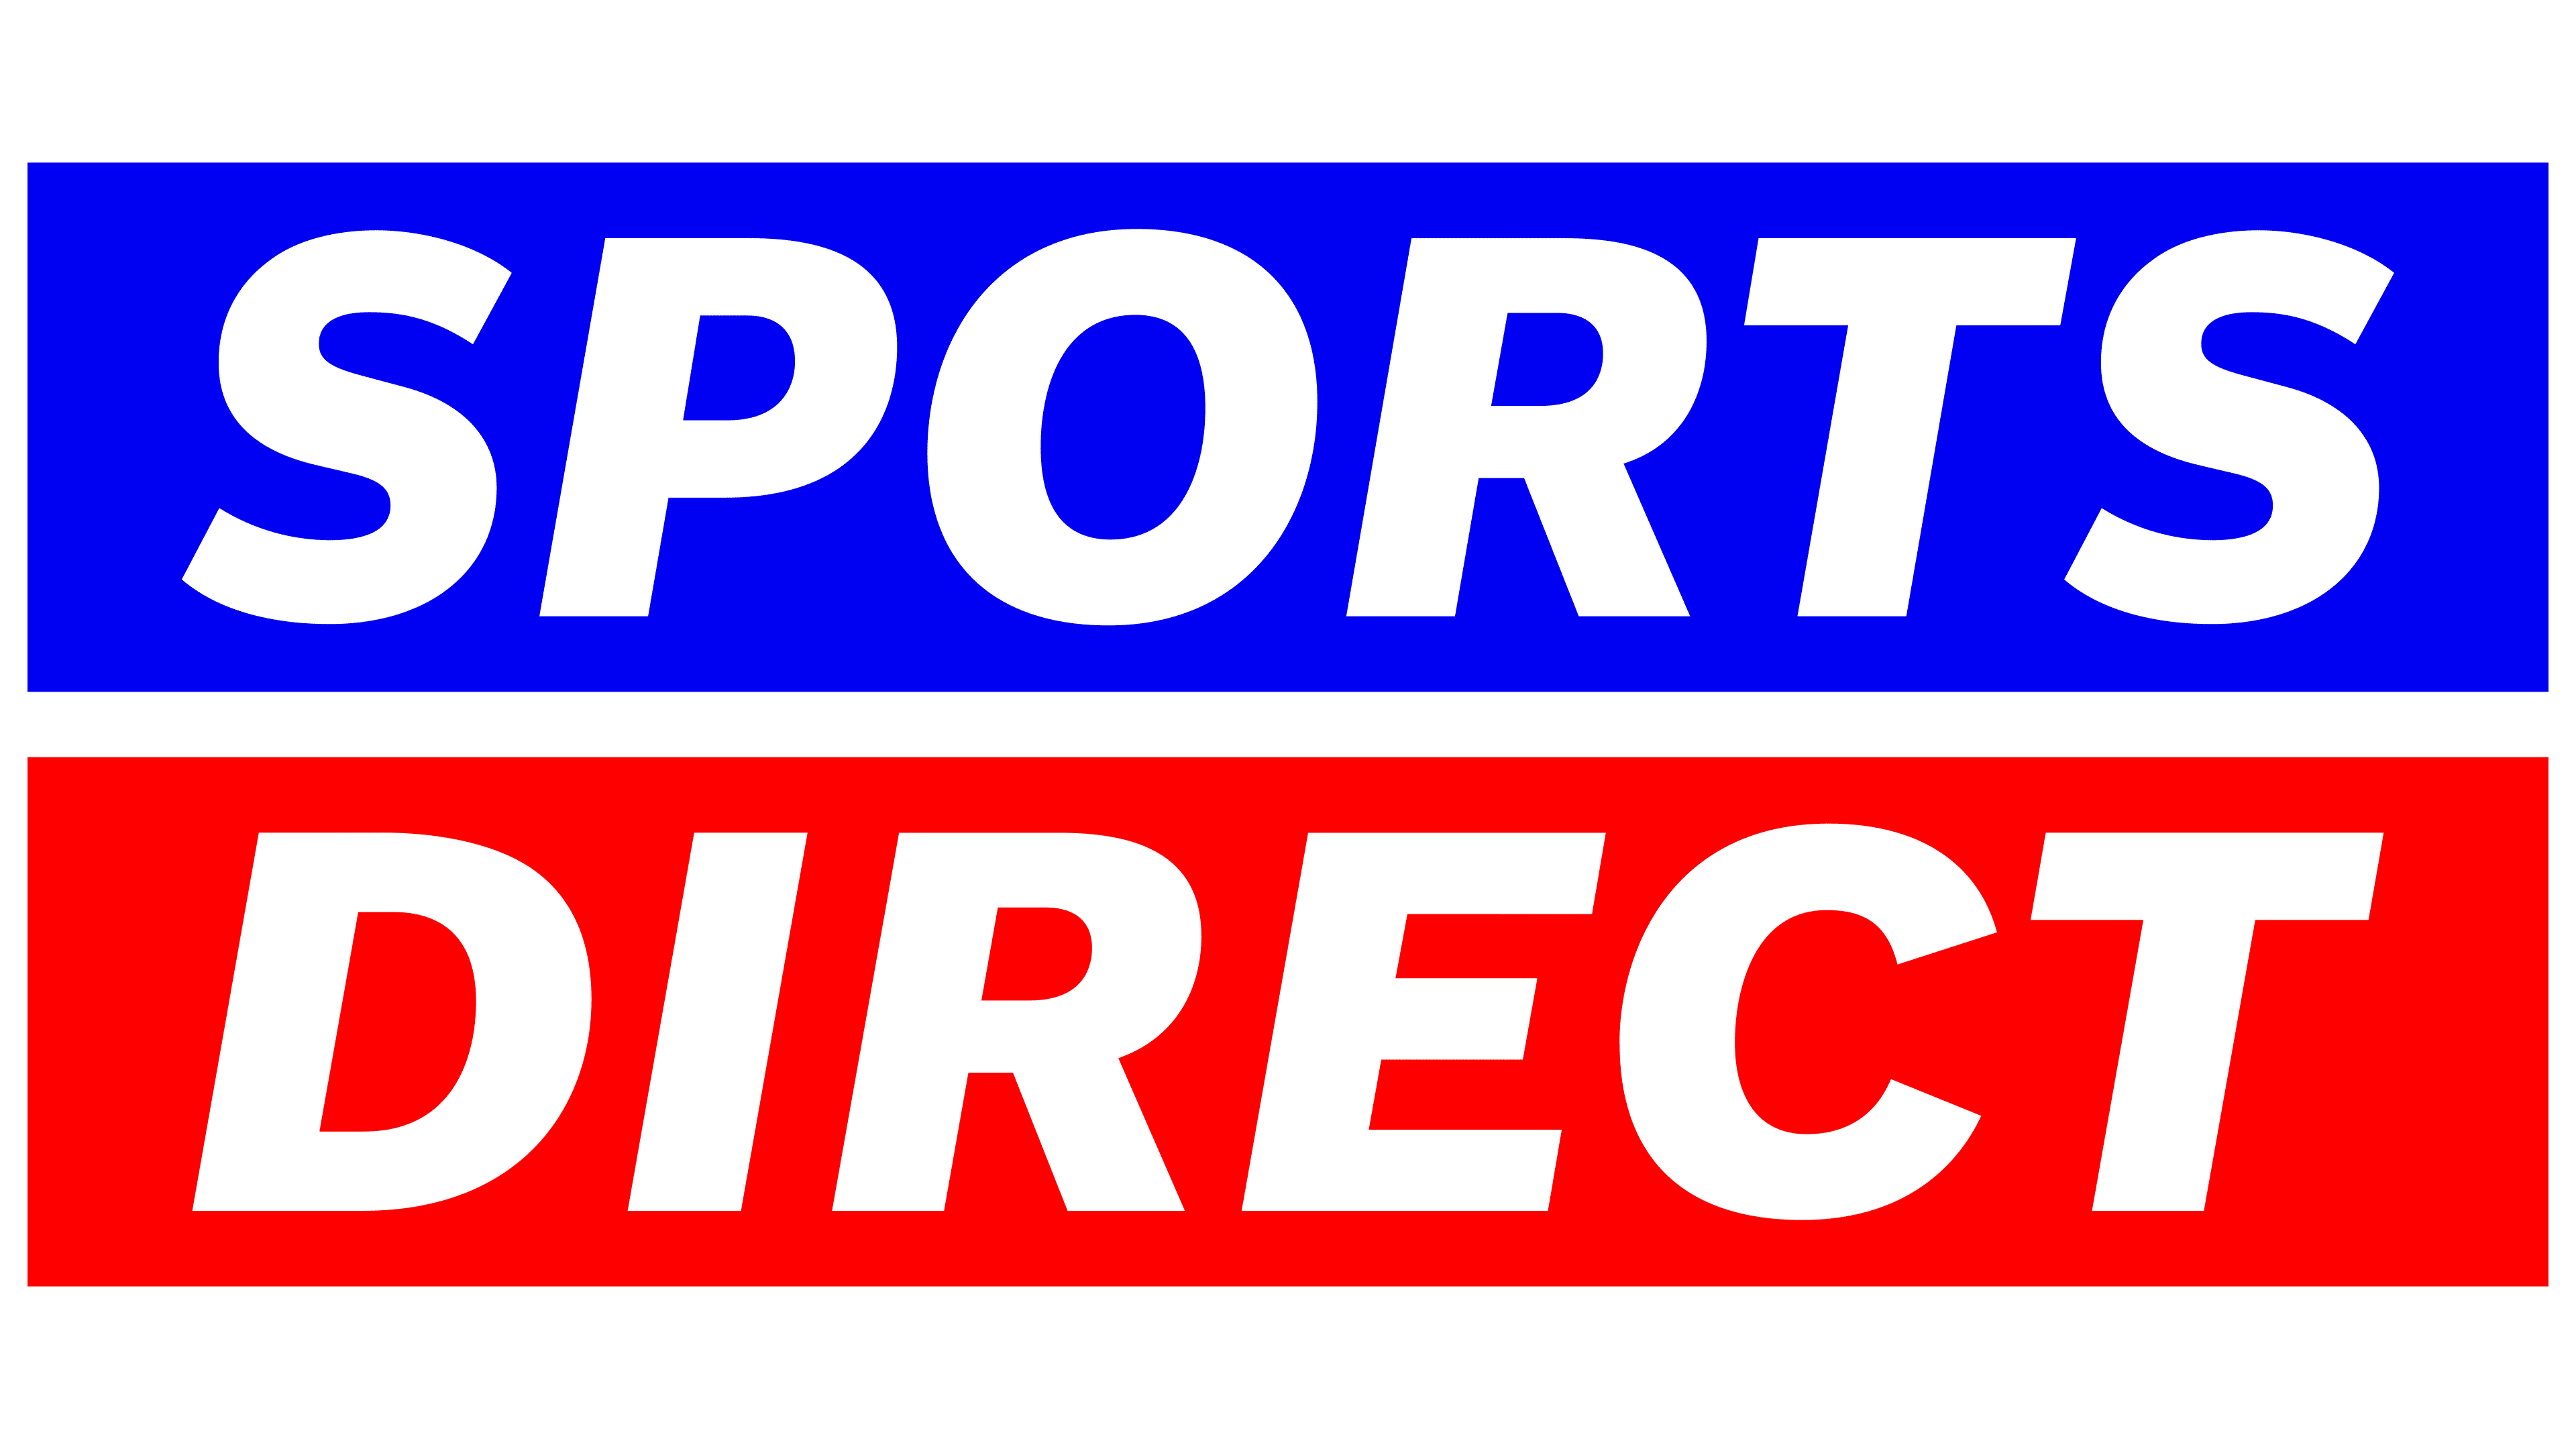 Sports Direct introduced a new logo